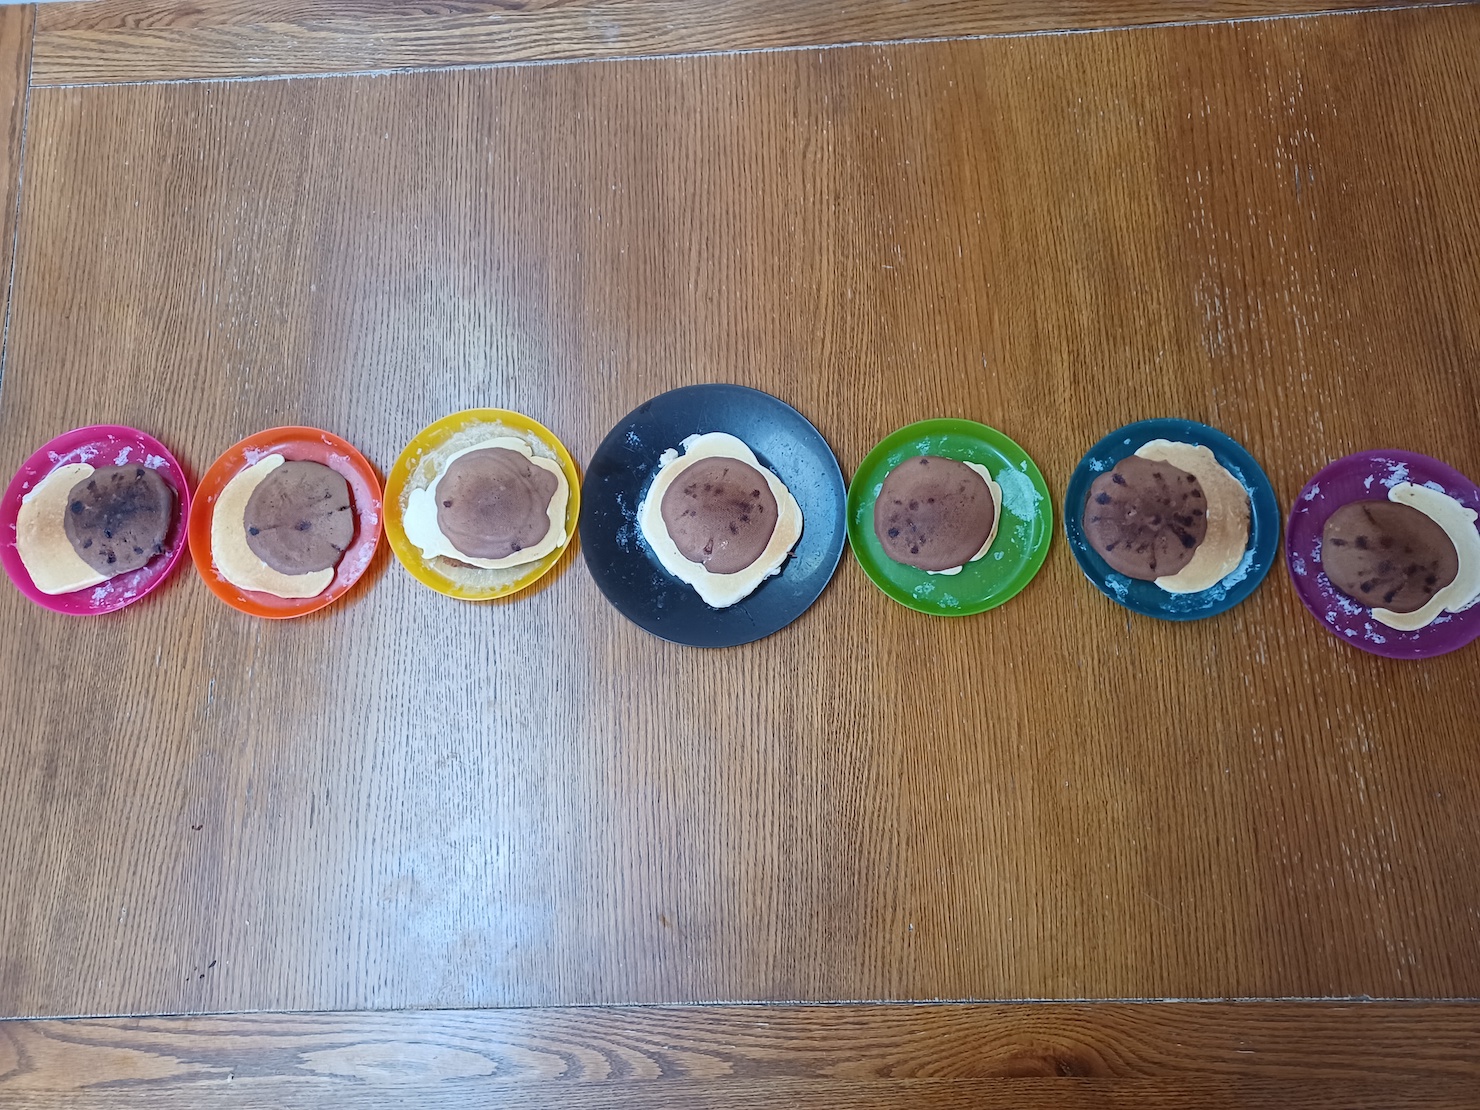 Chocolate and Regular pancake batter dribbled in eclipse shapes: 7 plates ranging from sun half covered to bailey's beads, to diamond ring, to totalality